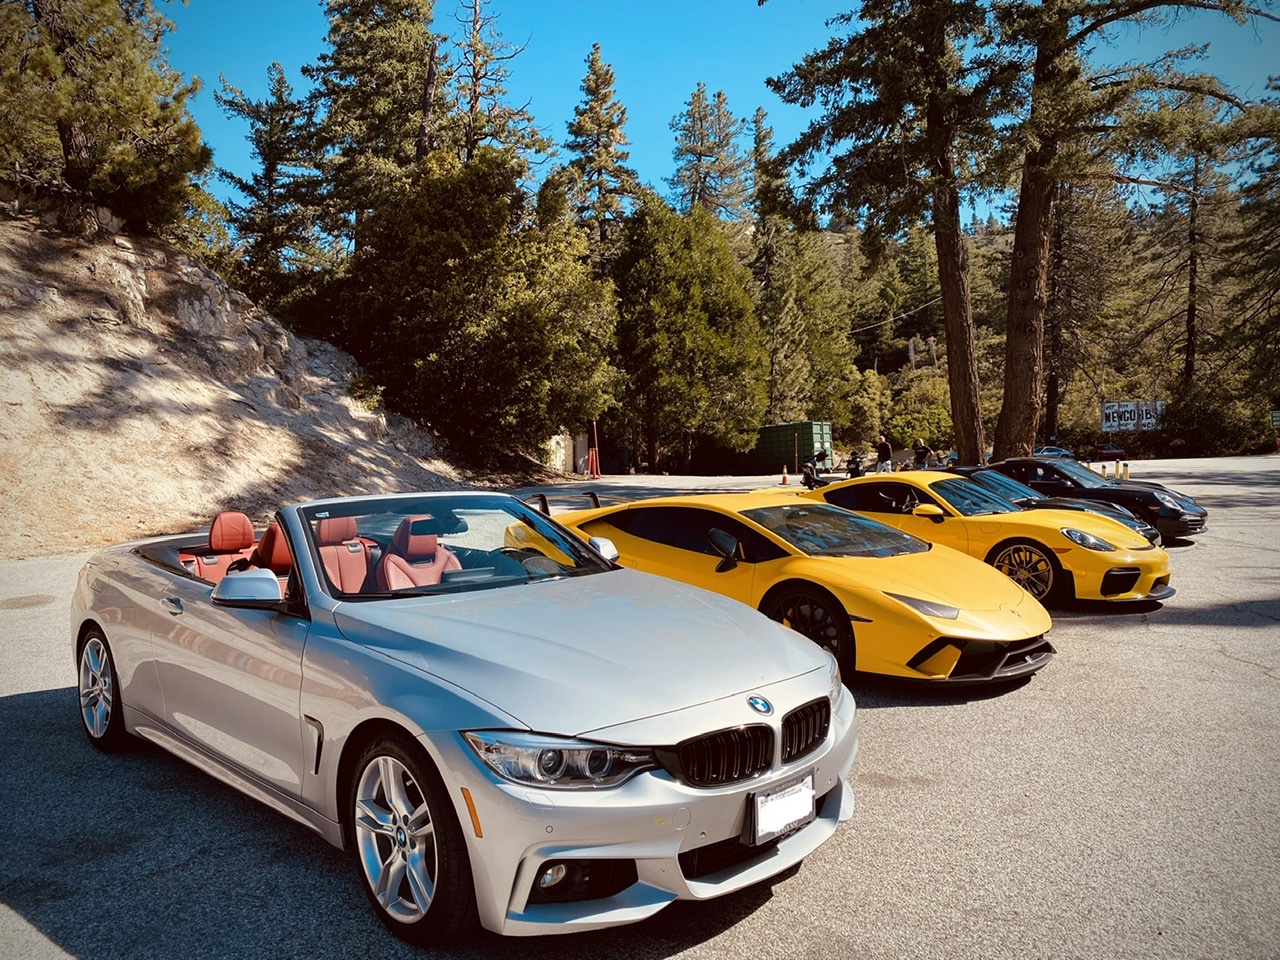 2017 F33 428i - The So Cal cruiser - Page 1 - Readers' Cars - PistonHeads